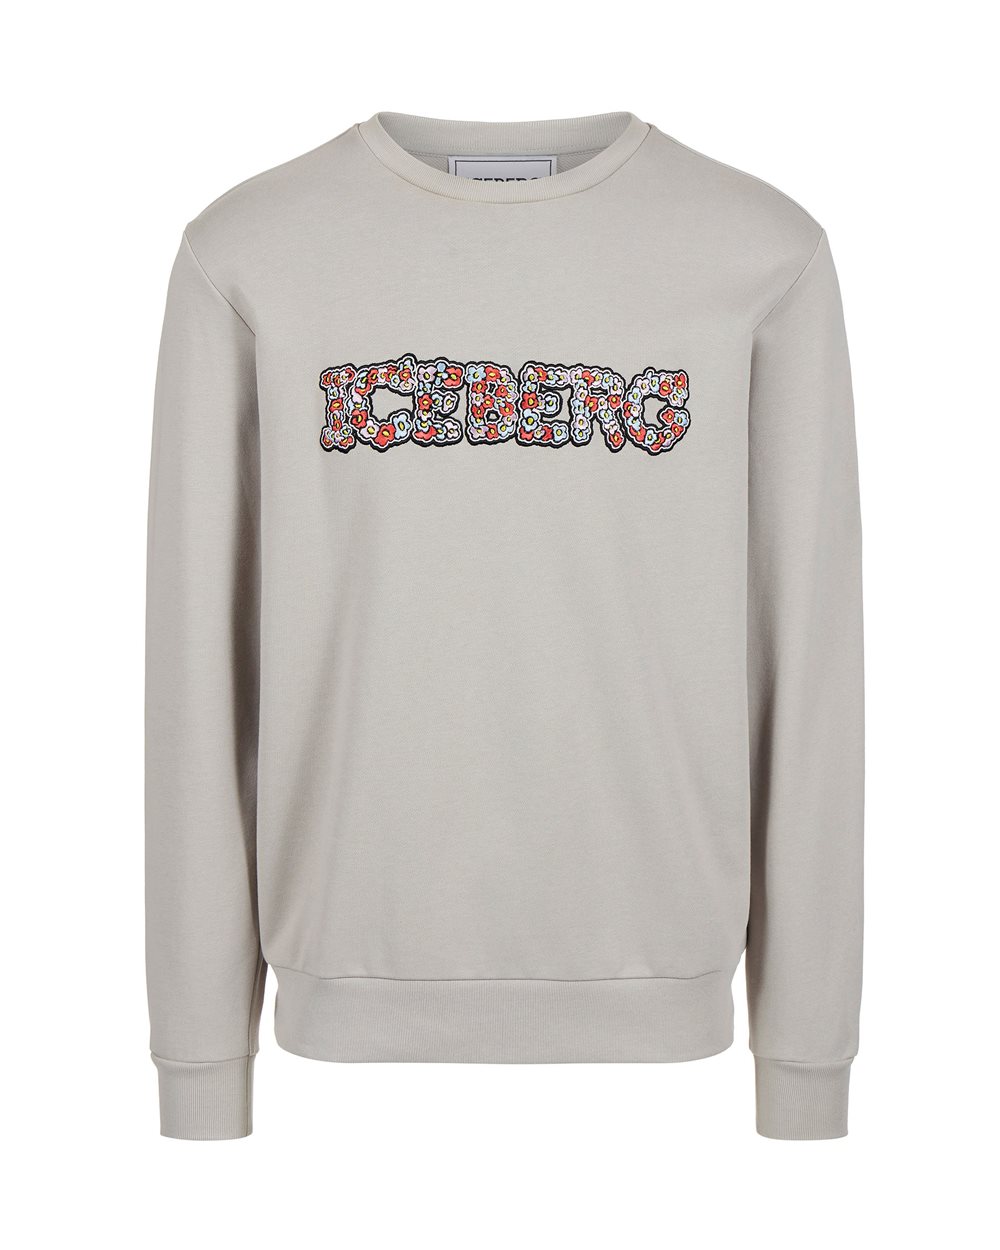 Sweatshirt with floral logo | Iceberg - Official Website